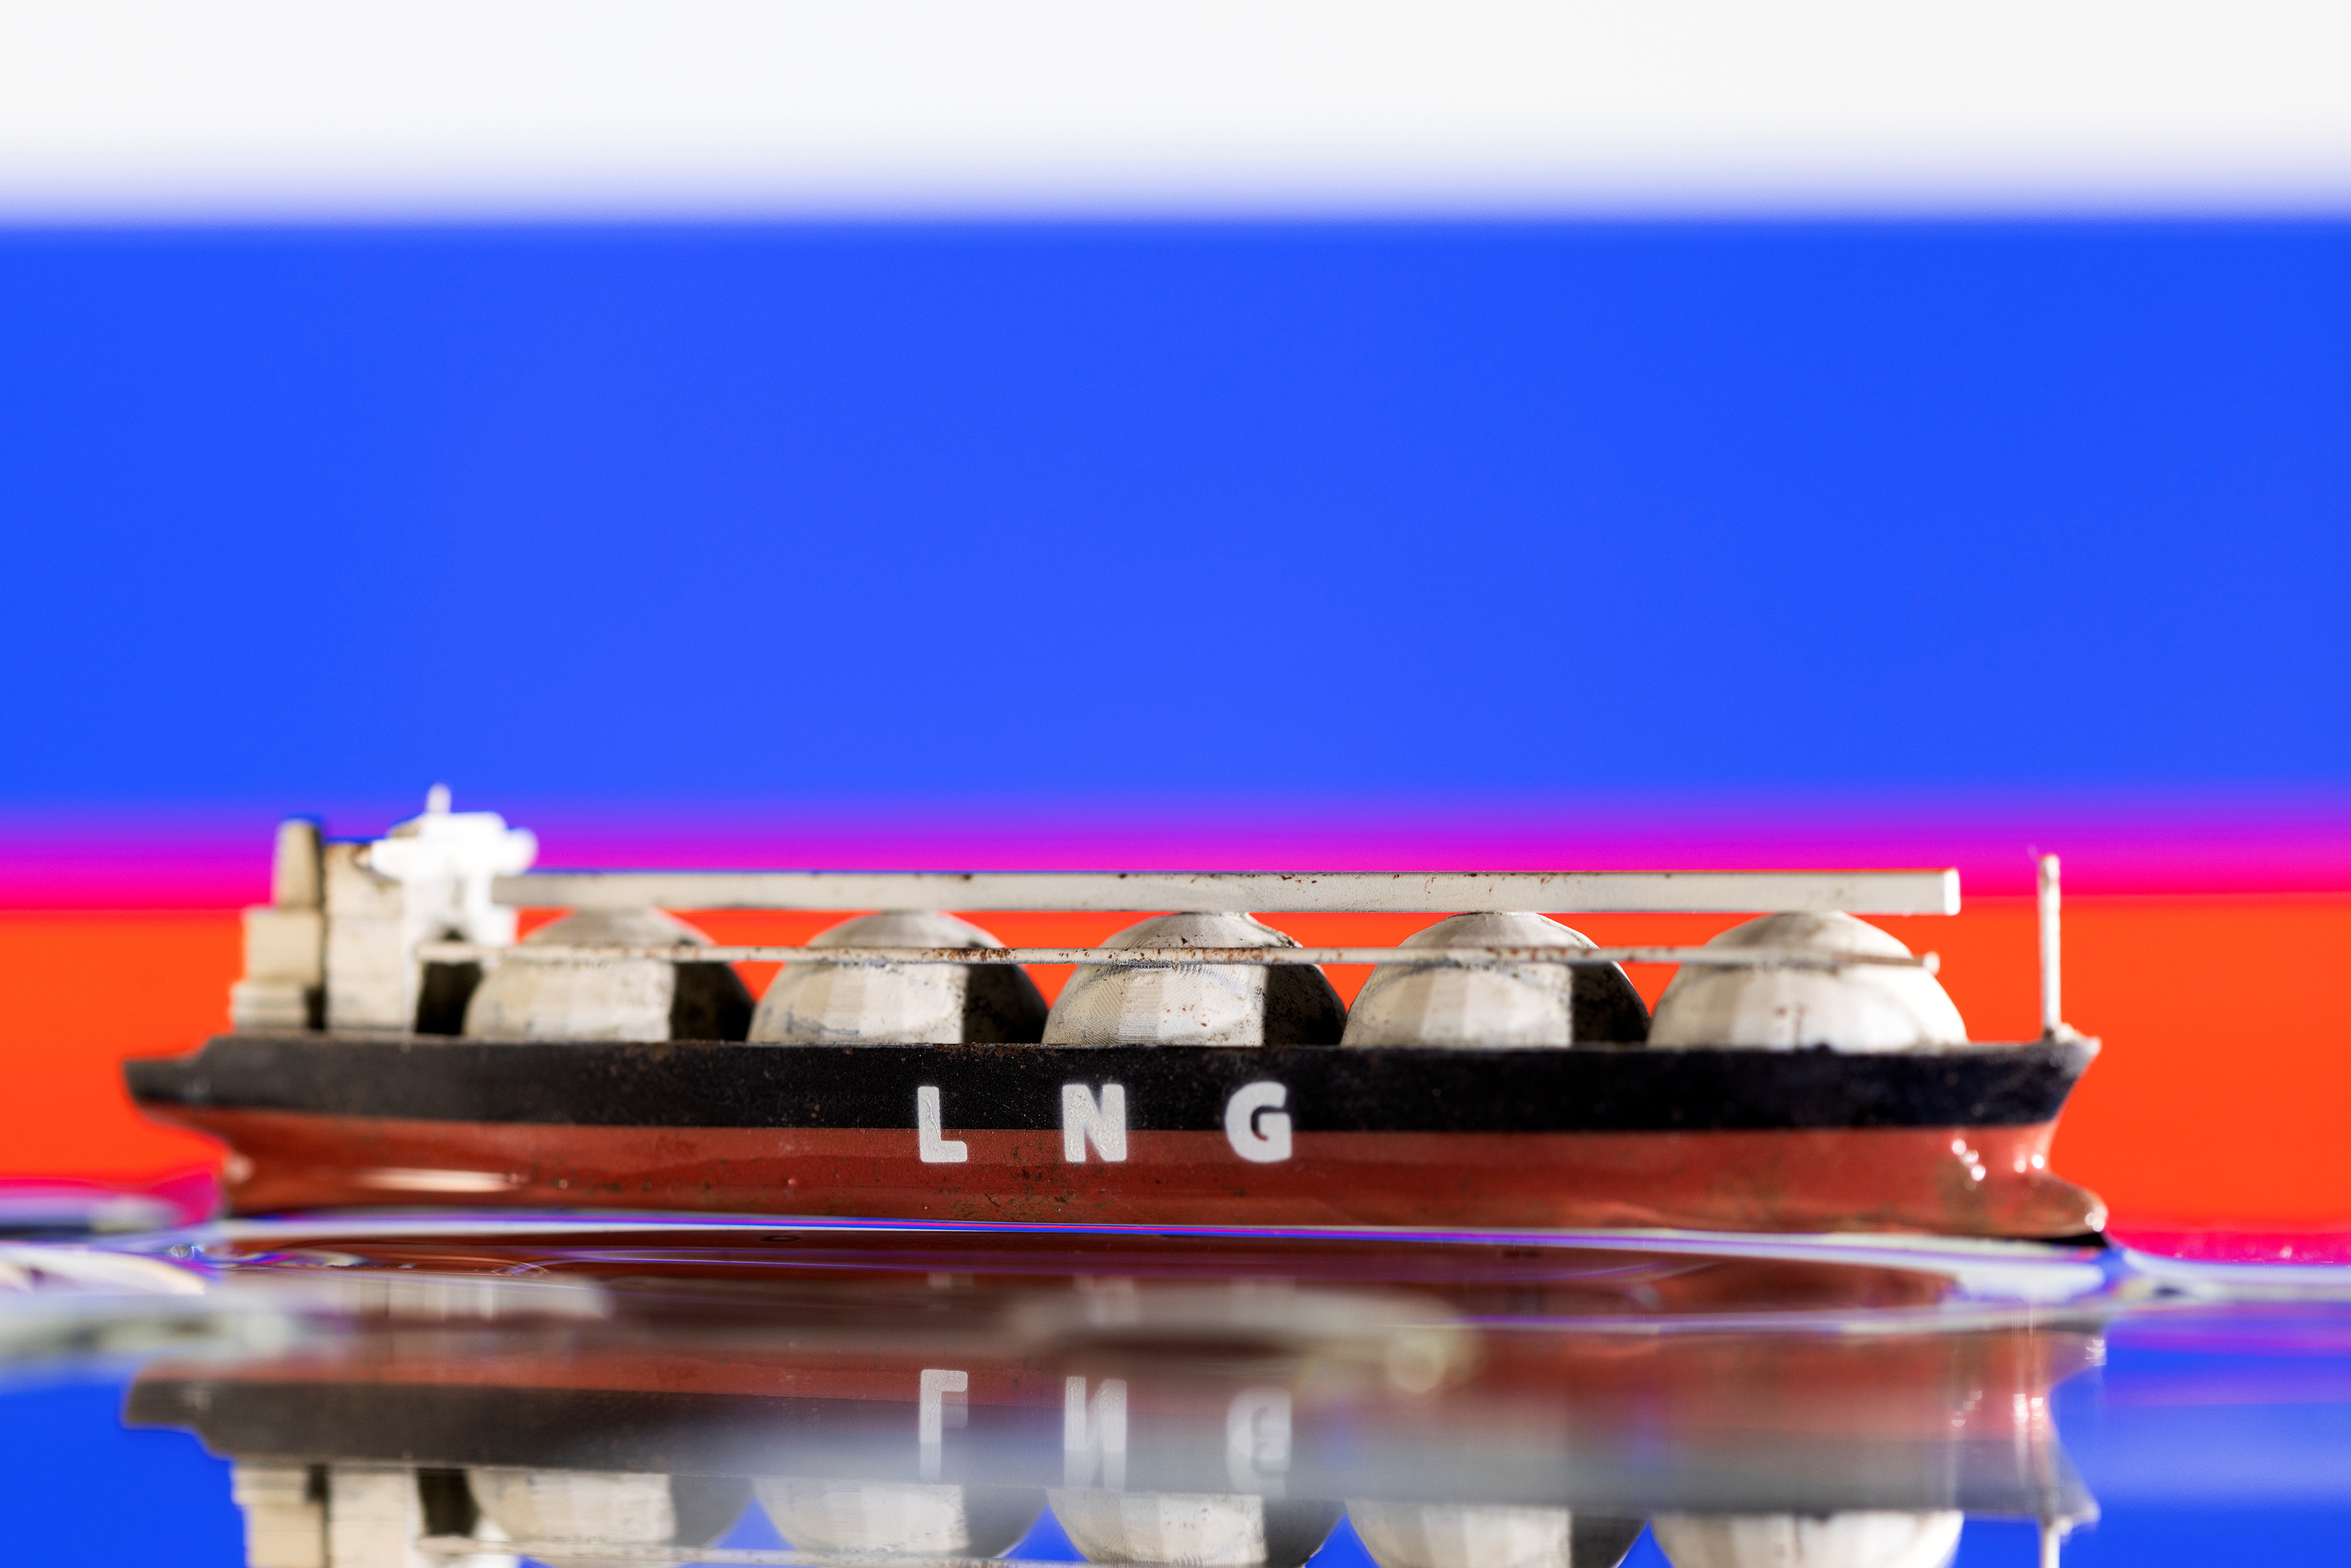 Illustration shows model of LNG tanker and Russia's flag